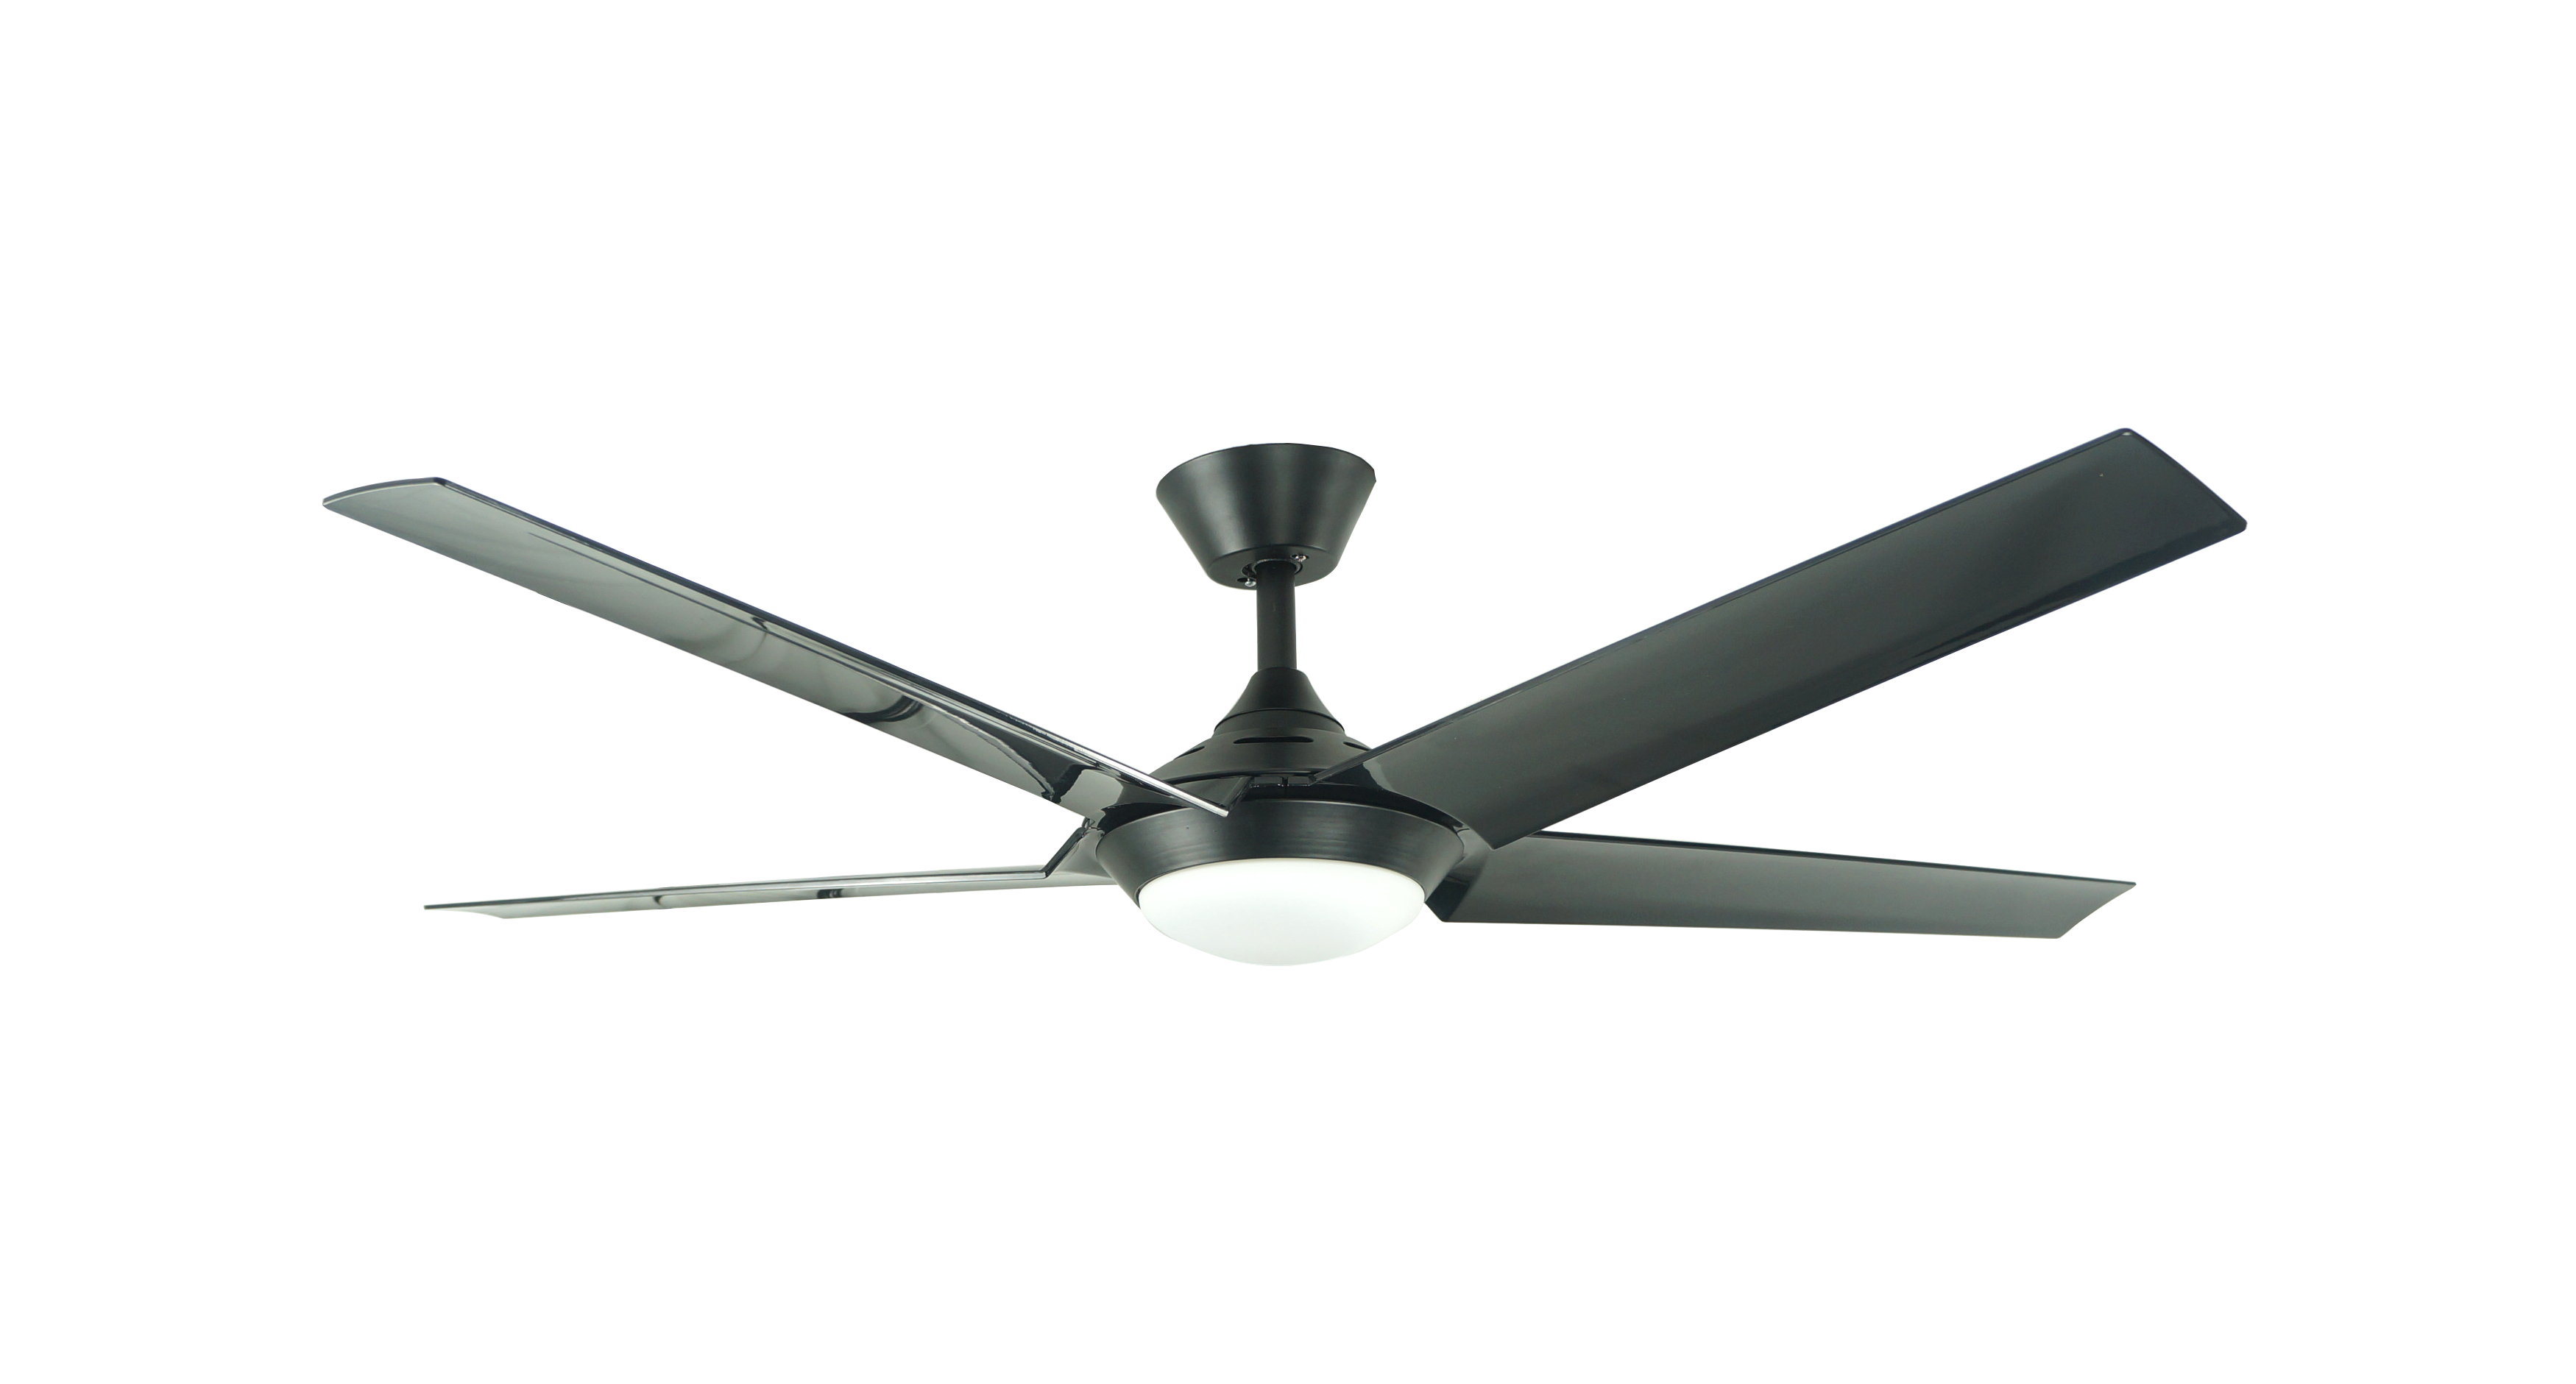 Airbena Ceiling Ceiling Fan 52 "ABS Fan Blade with And without Light for Household Ceiling Fans